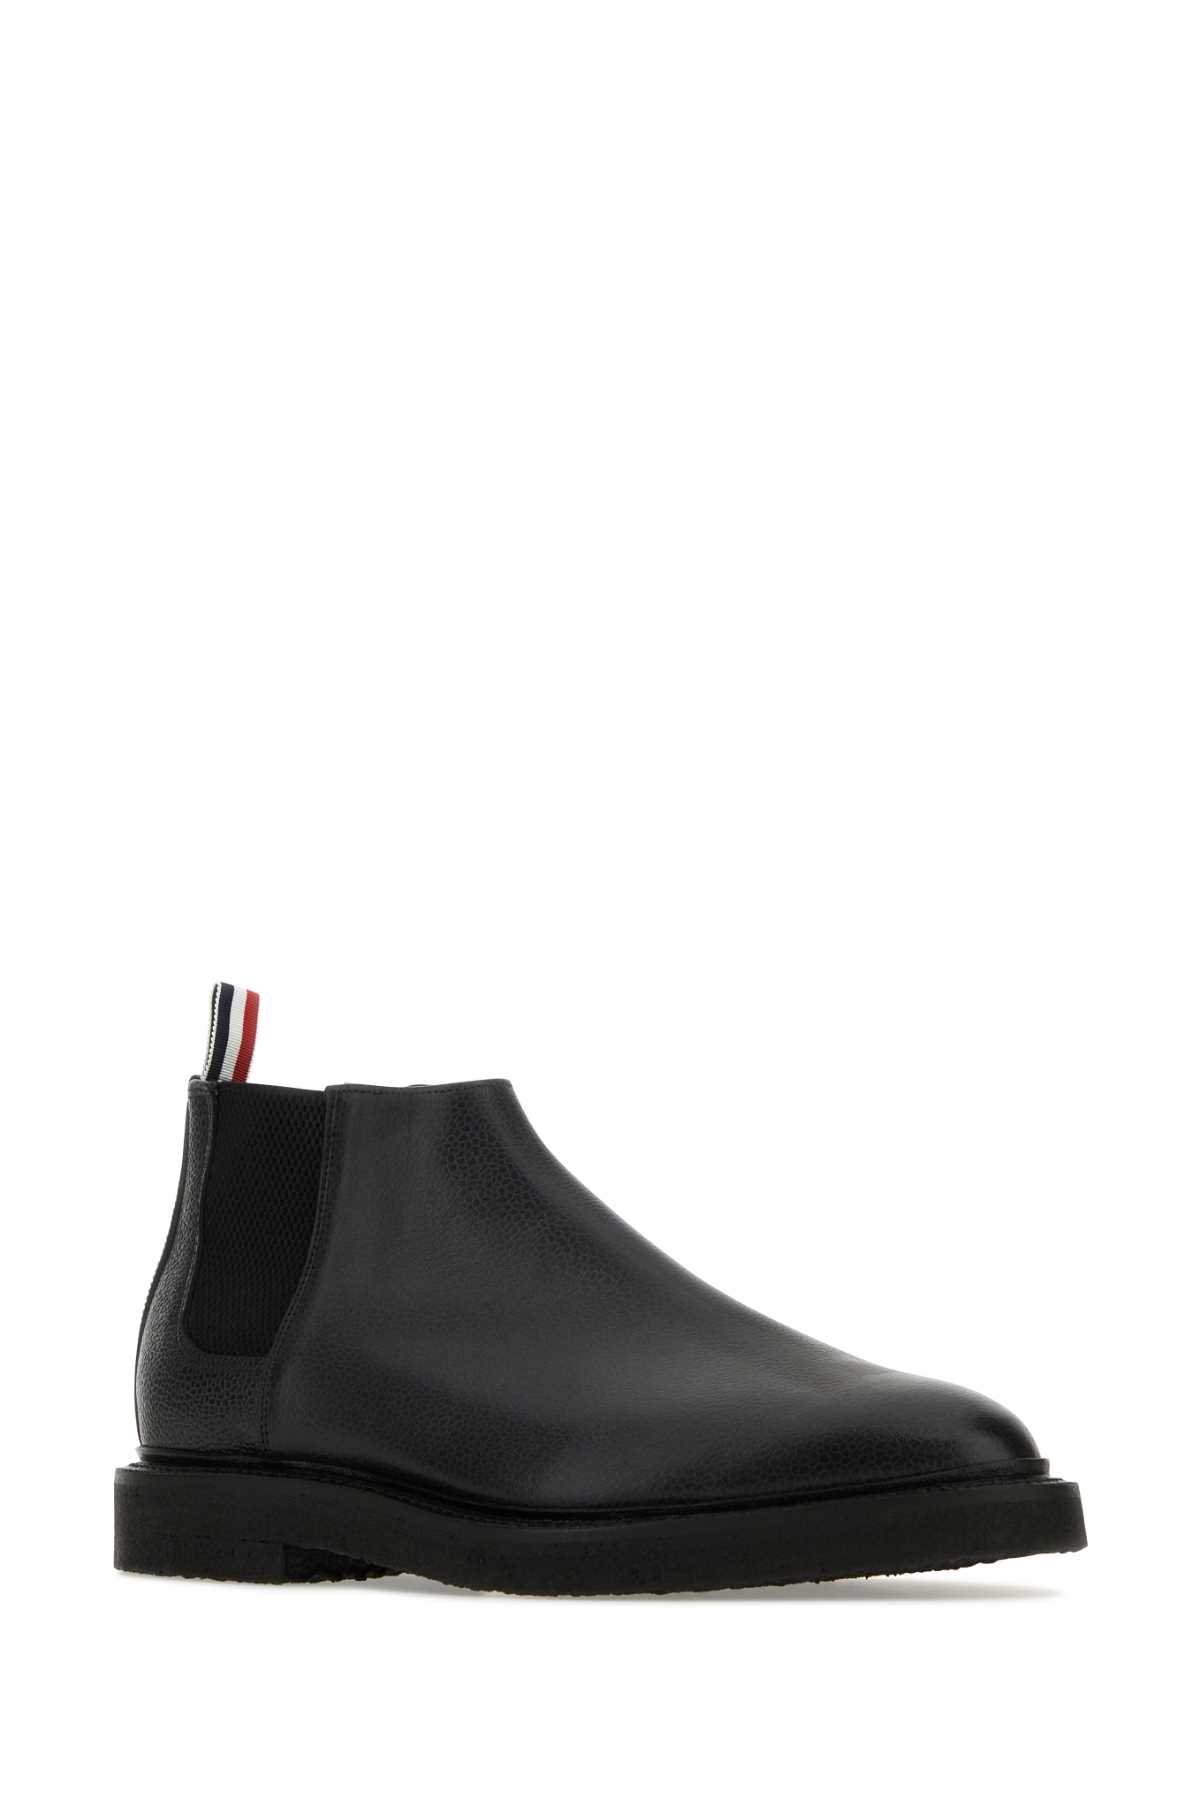 Thom Browne Black Leather Ankle Boots